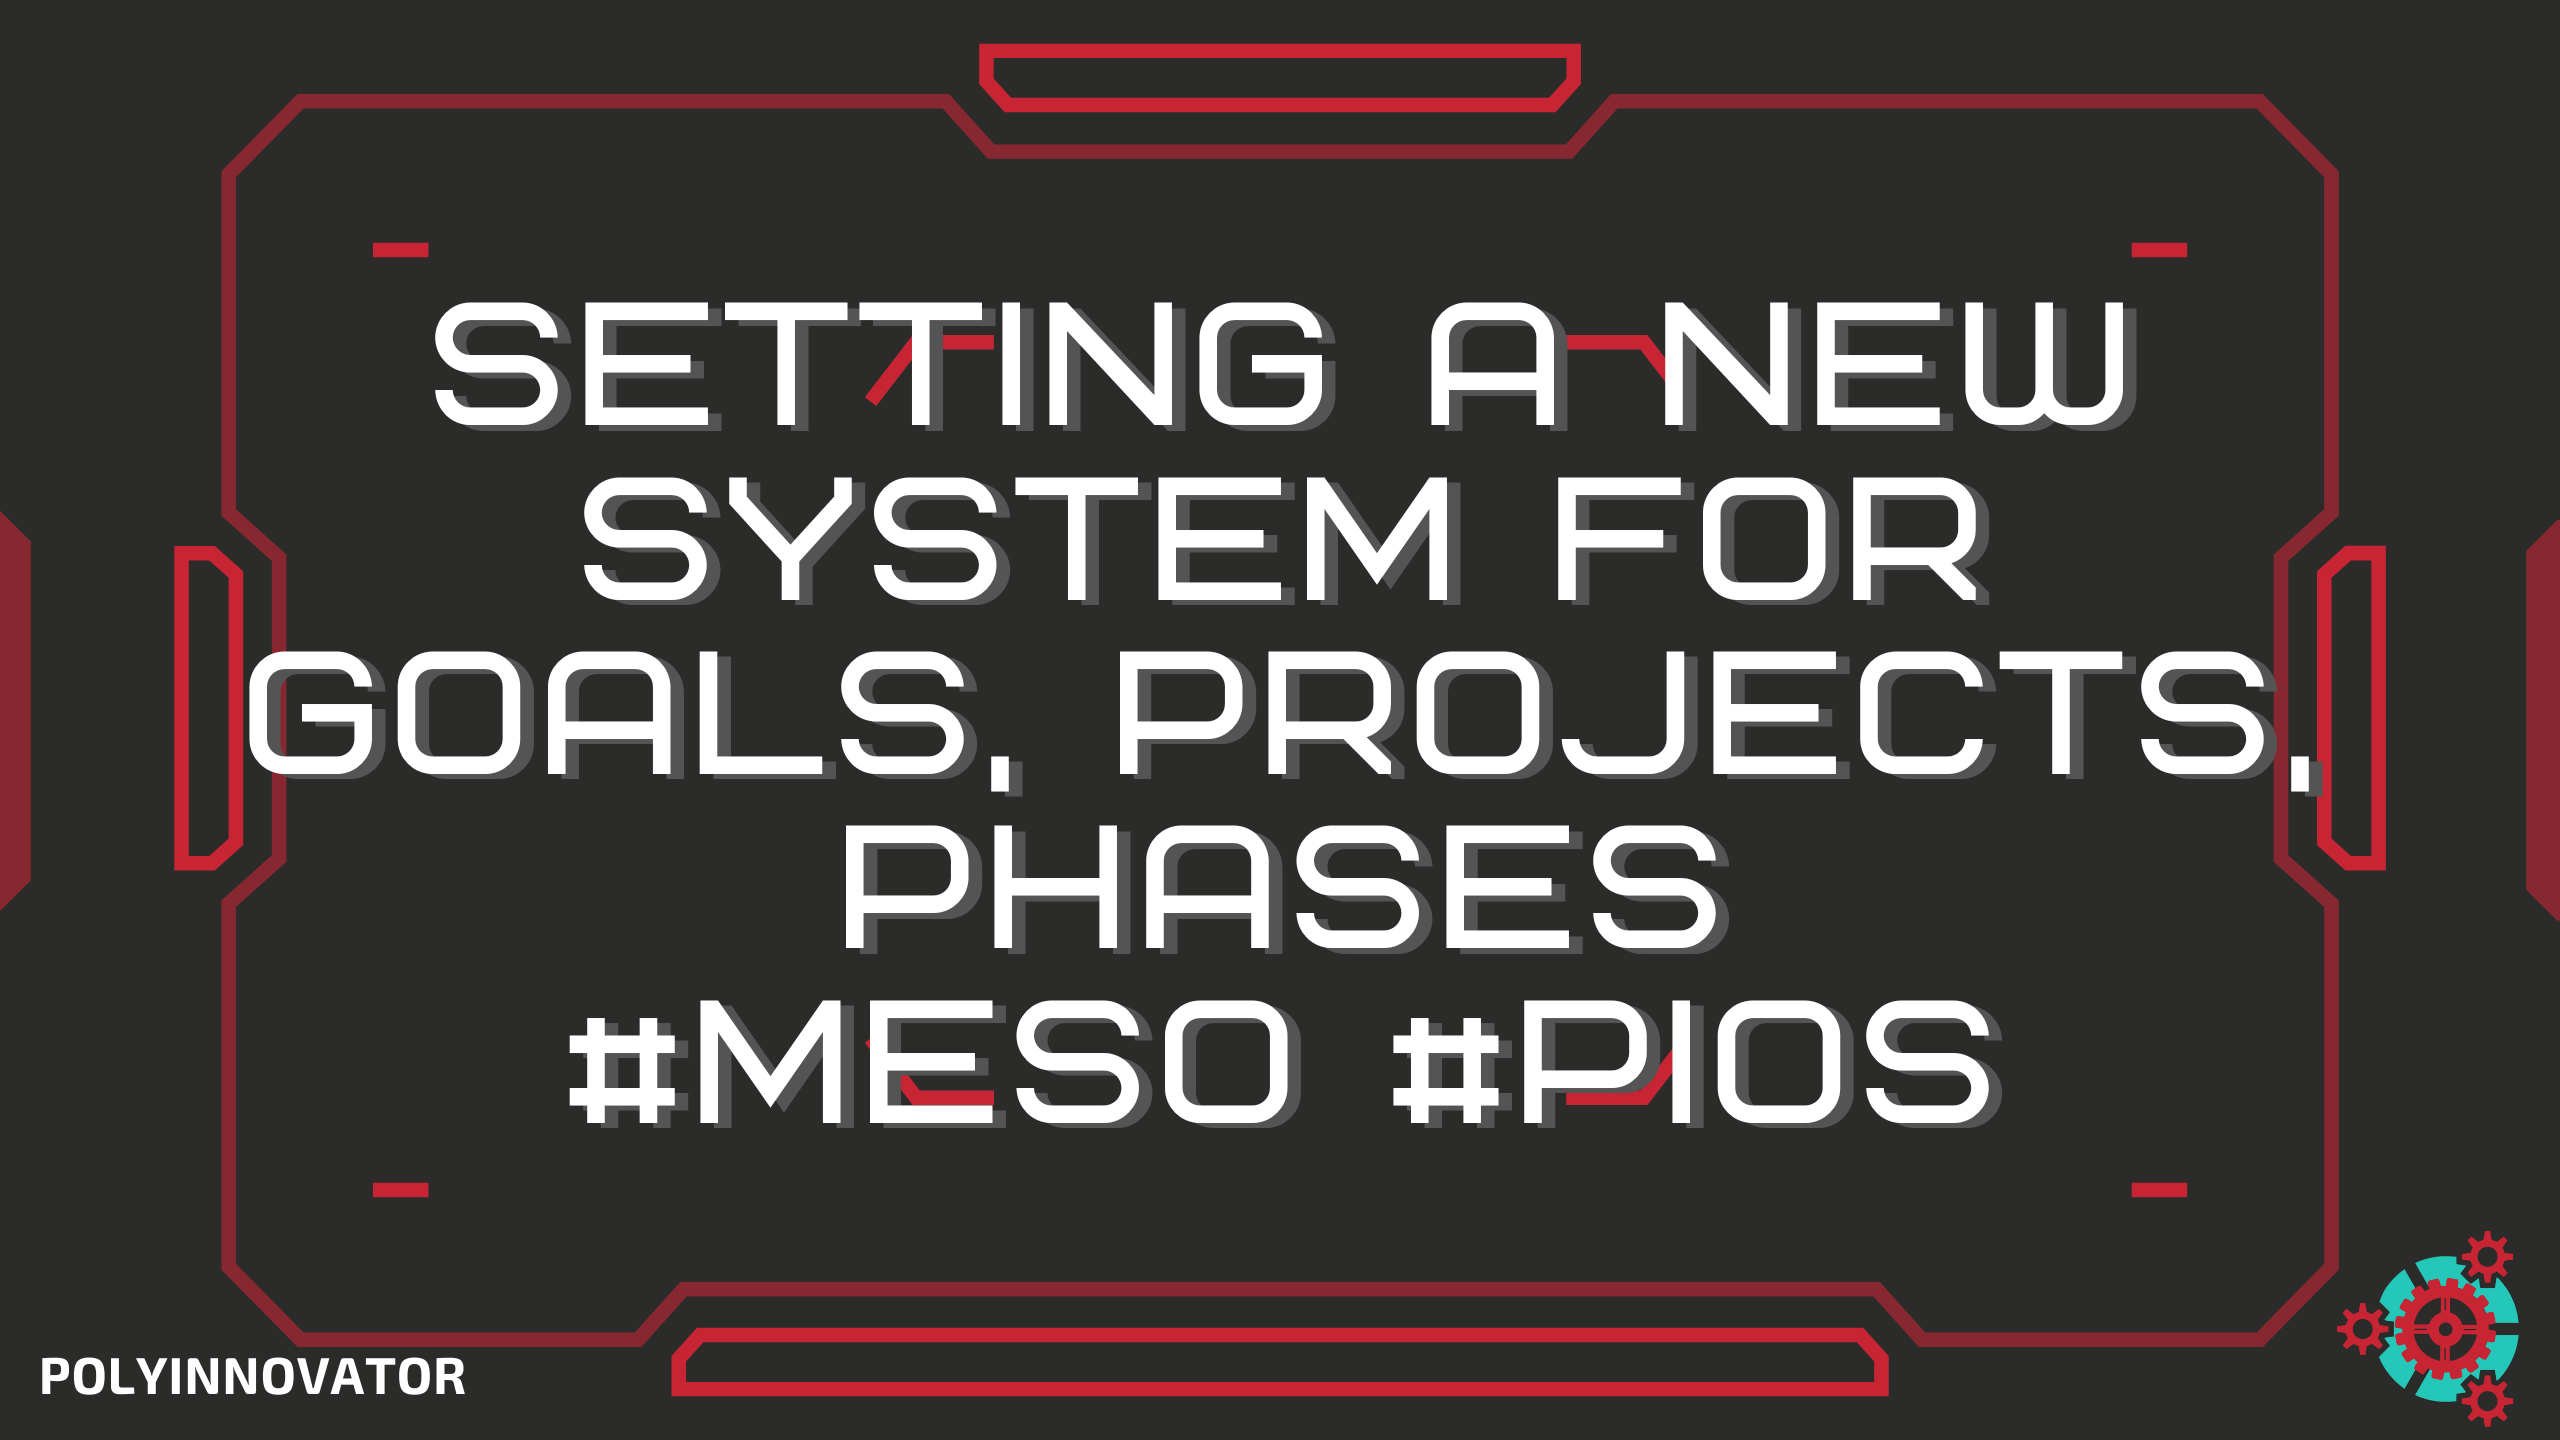 Setting a New System for Goals, Projects, Phases #MESO #PIOS